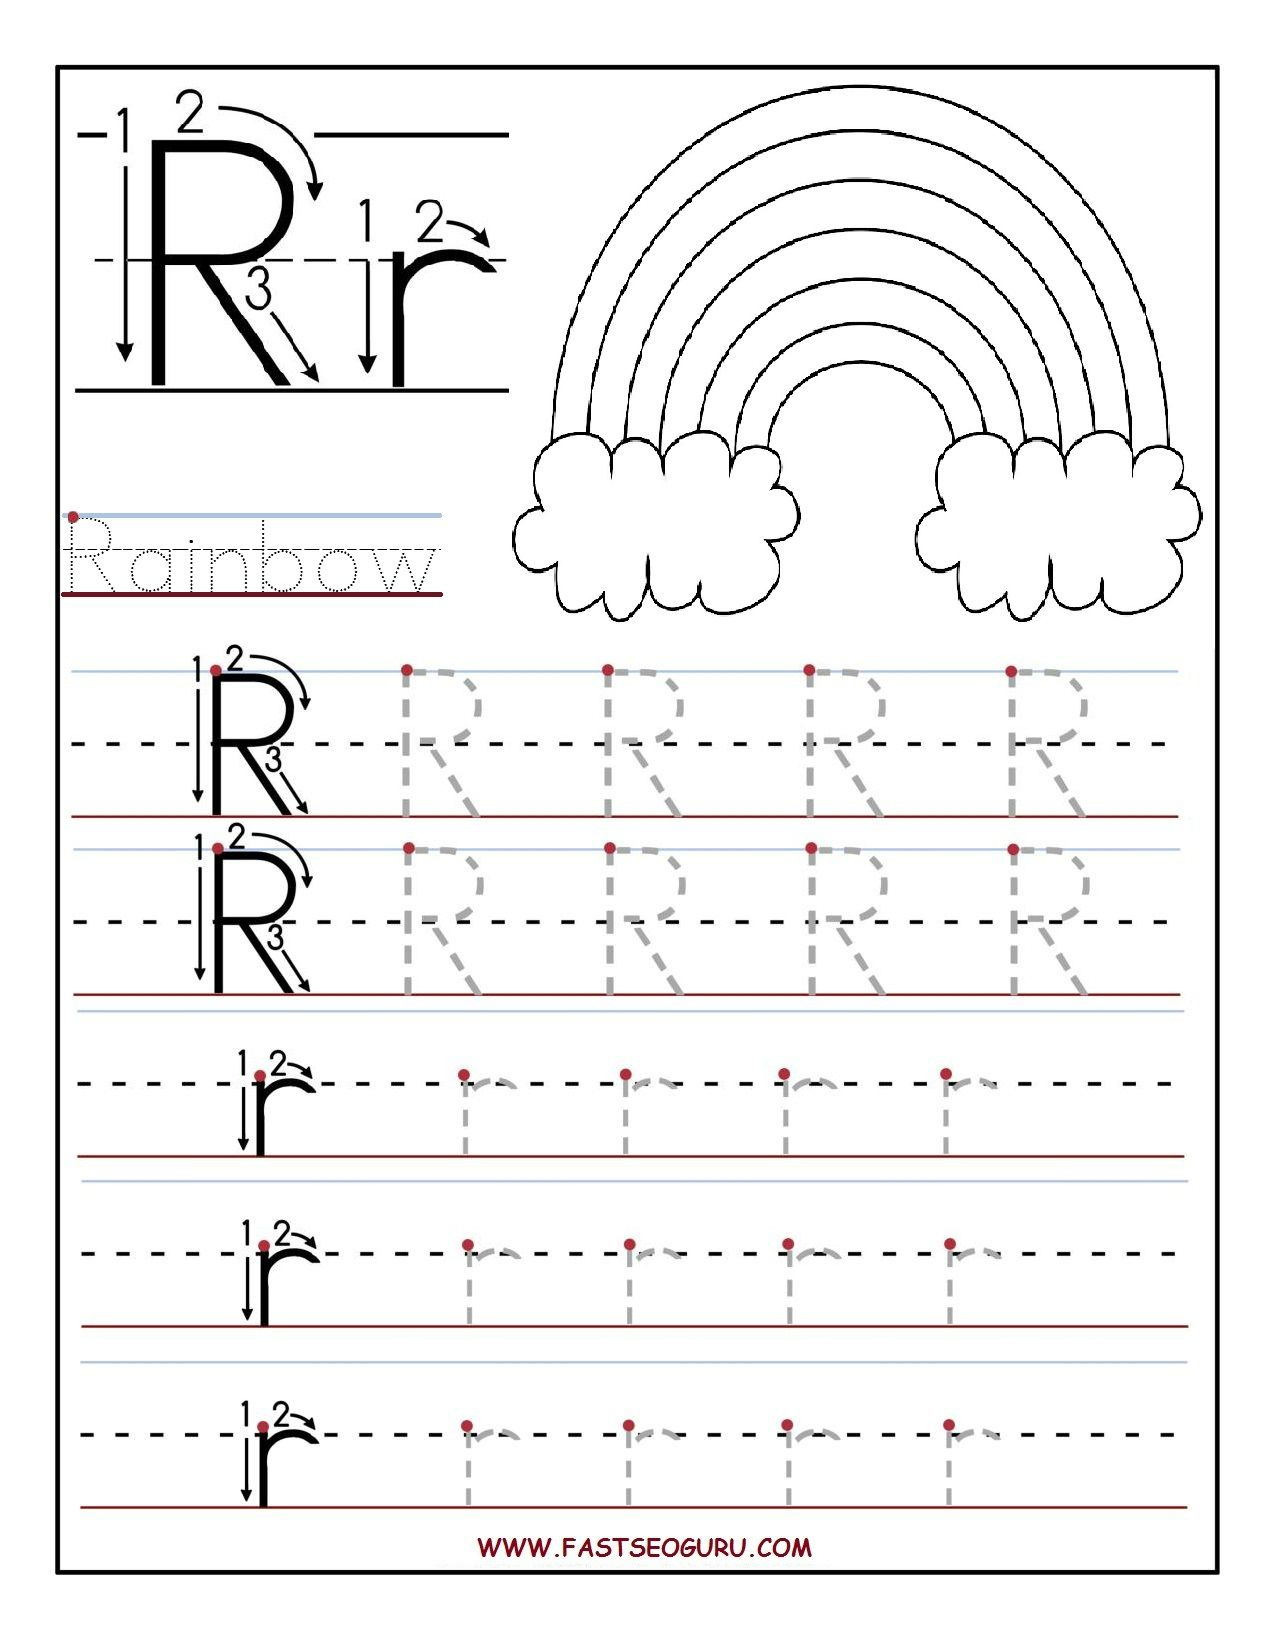 Printable Letter R Tracing Worksheets For Preschool | Teacher - Free Printable Preschool Worksheets For The Letter R